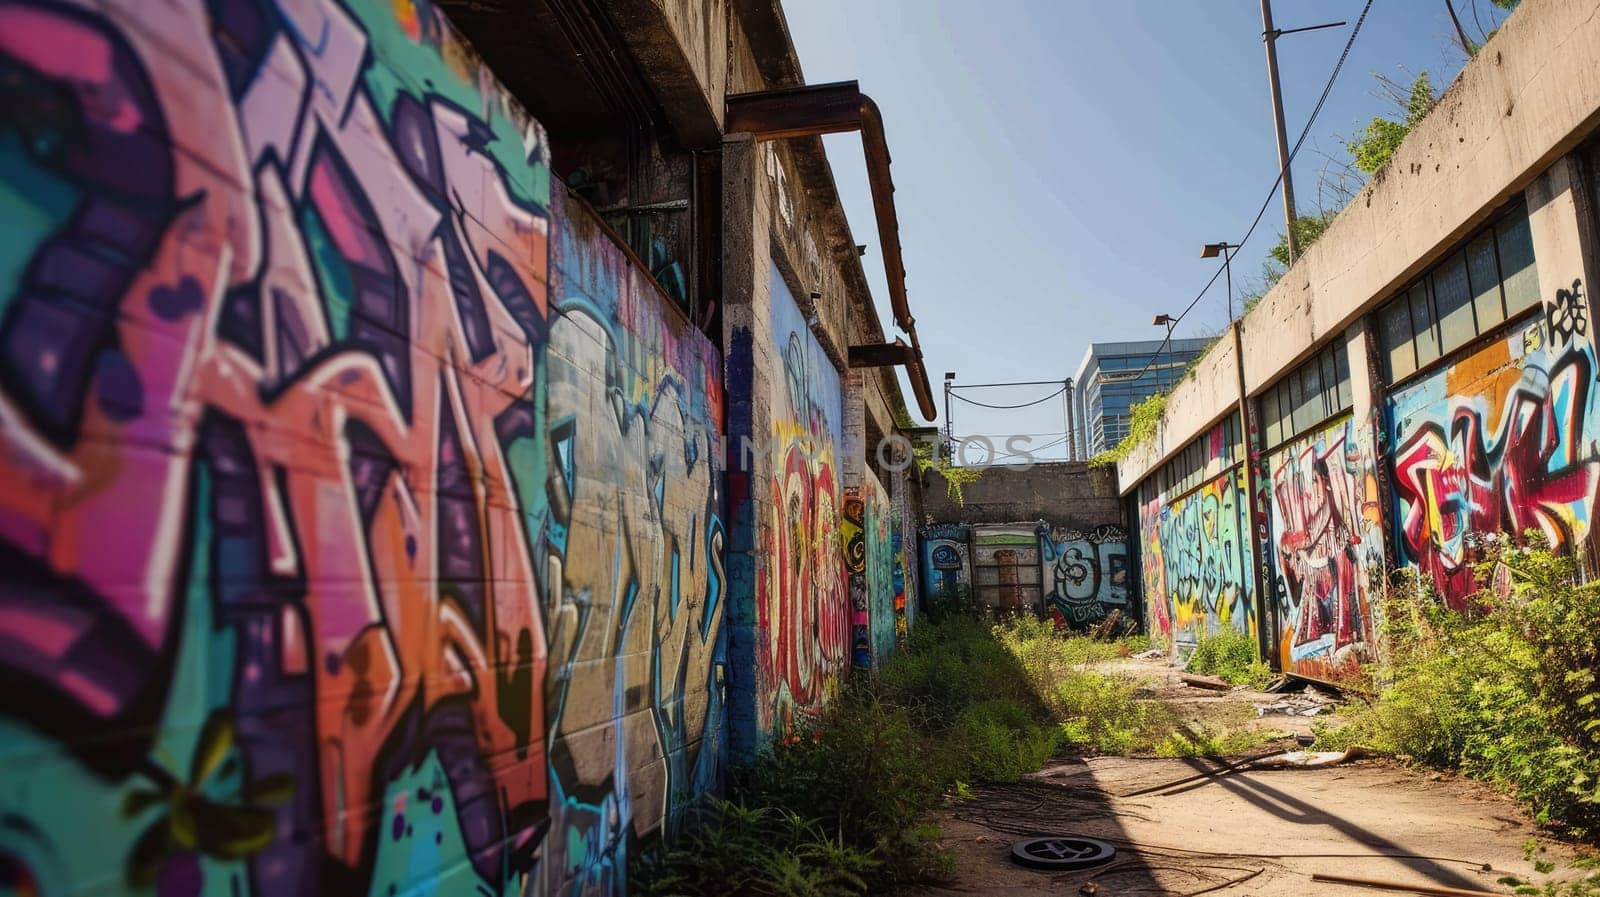 Photos of bright graffiti on the walls of small streets, reflecting urban culture and adding creative design to urban spaces.